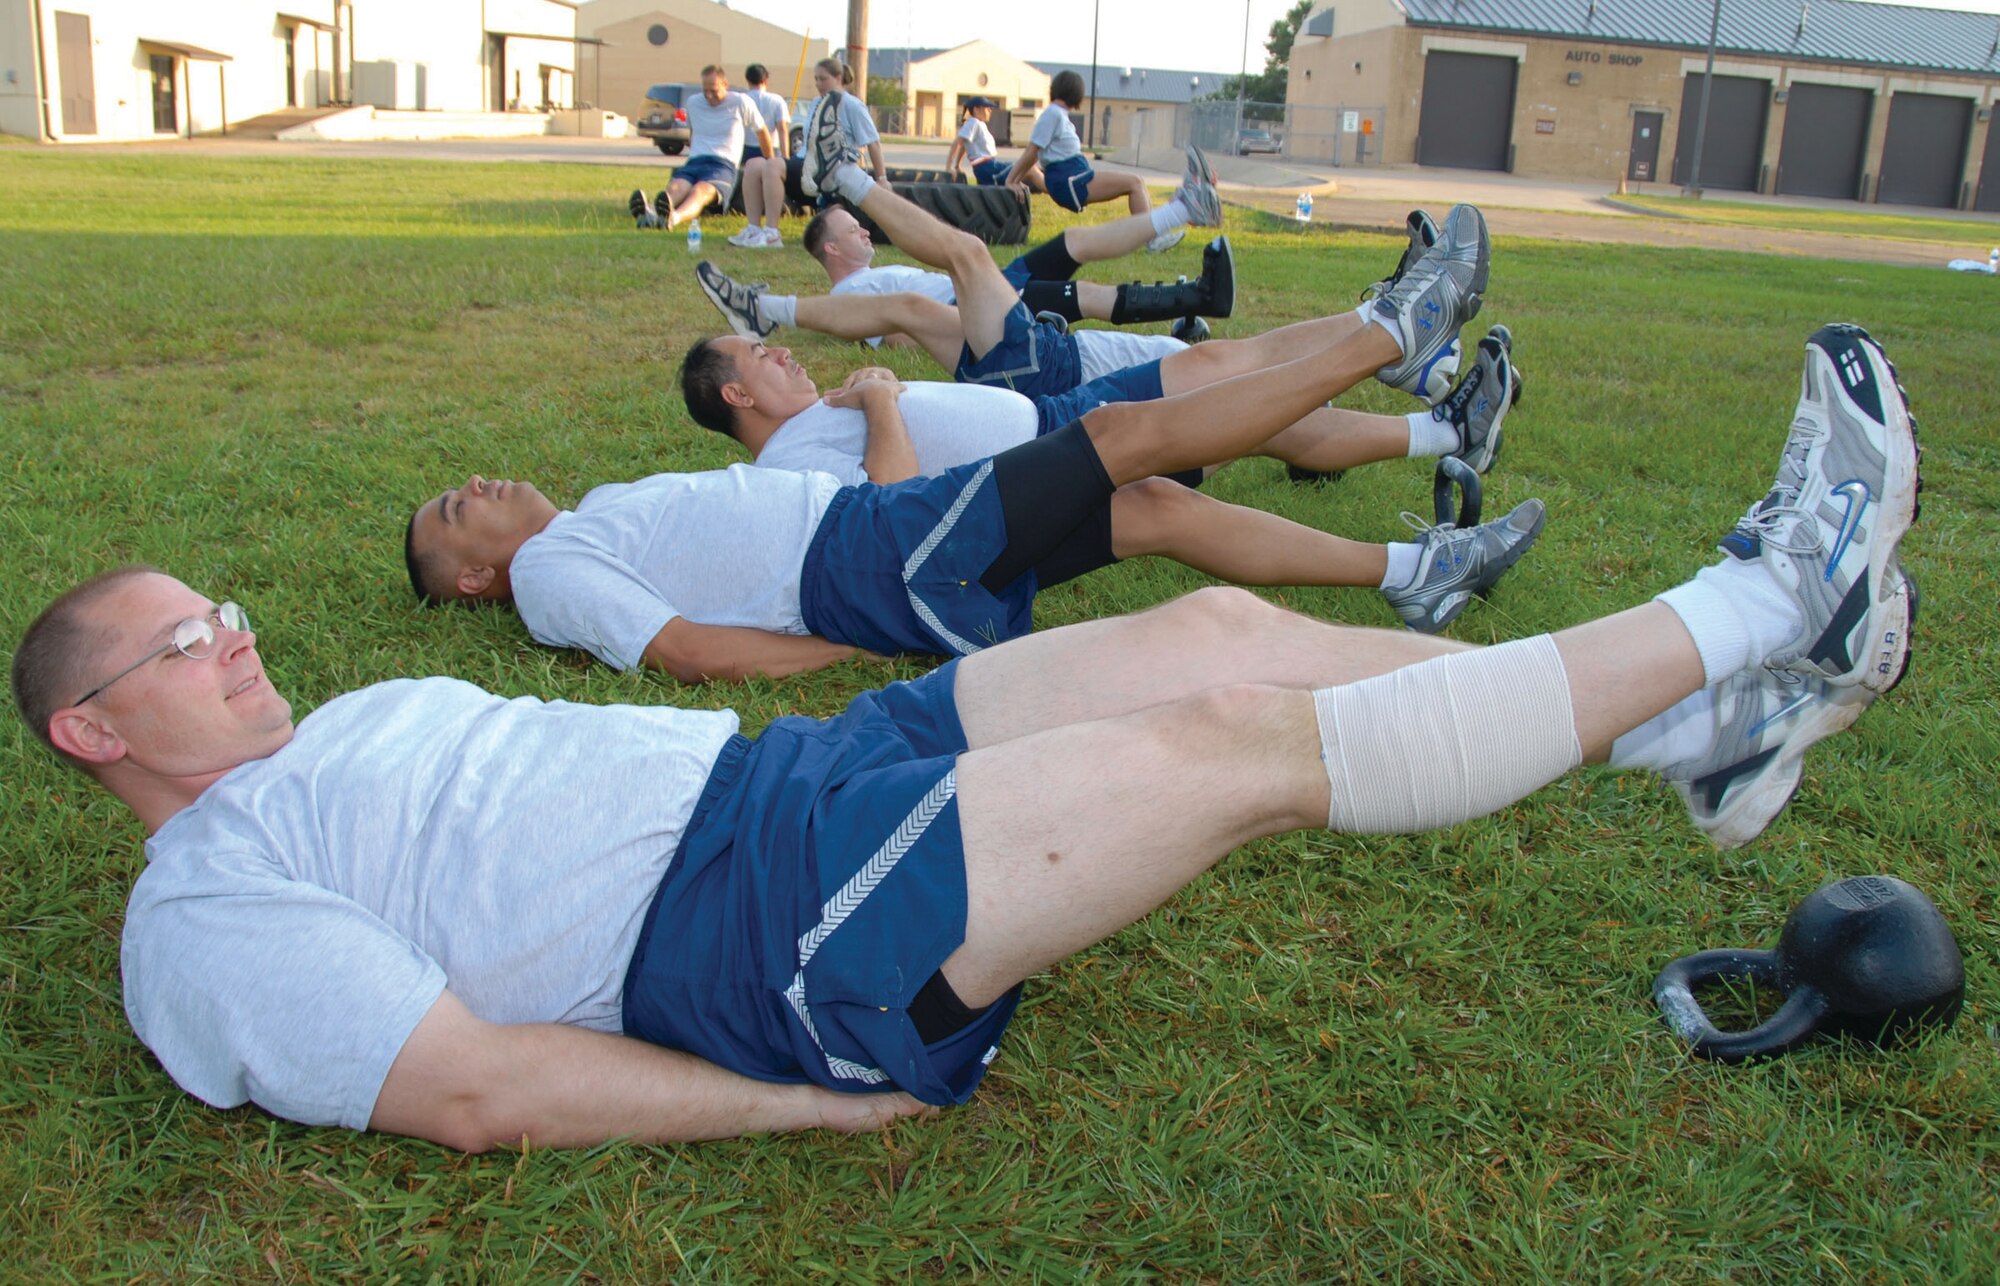 Senior NCO Academy students and instructors participate in the school's "Conditions Limited" program for those on Physical Training profiles. The program allows injured Airmen to participate in different forms of physical exercise to stay healthy. (U.S. Air Force photo/Jamie Pitcher)